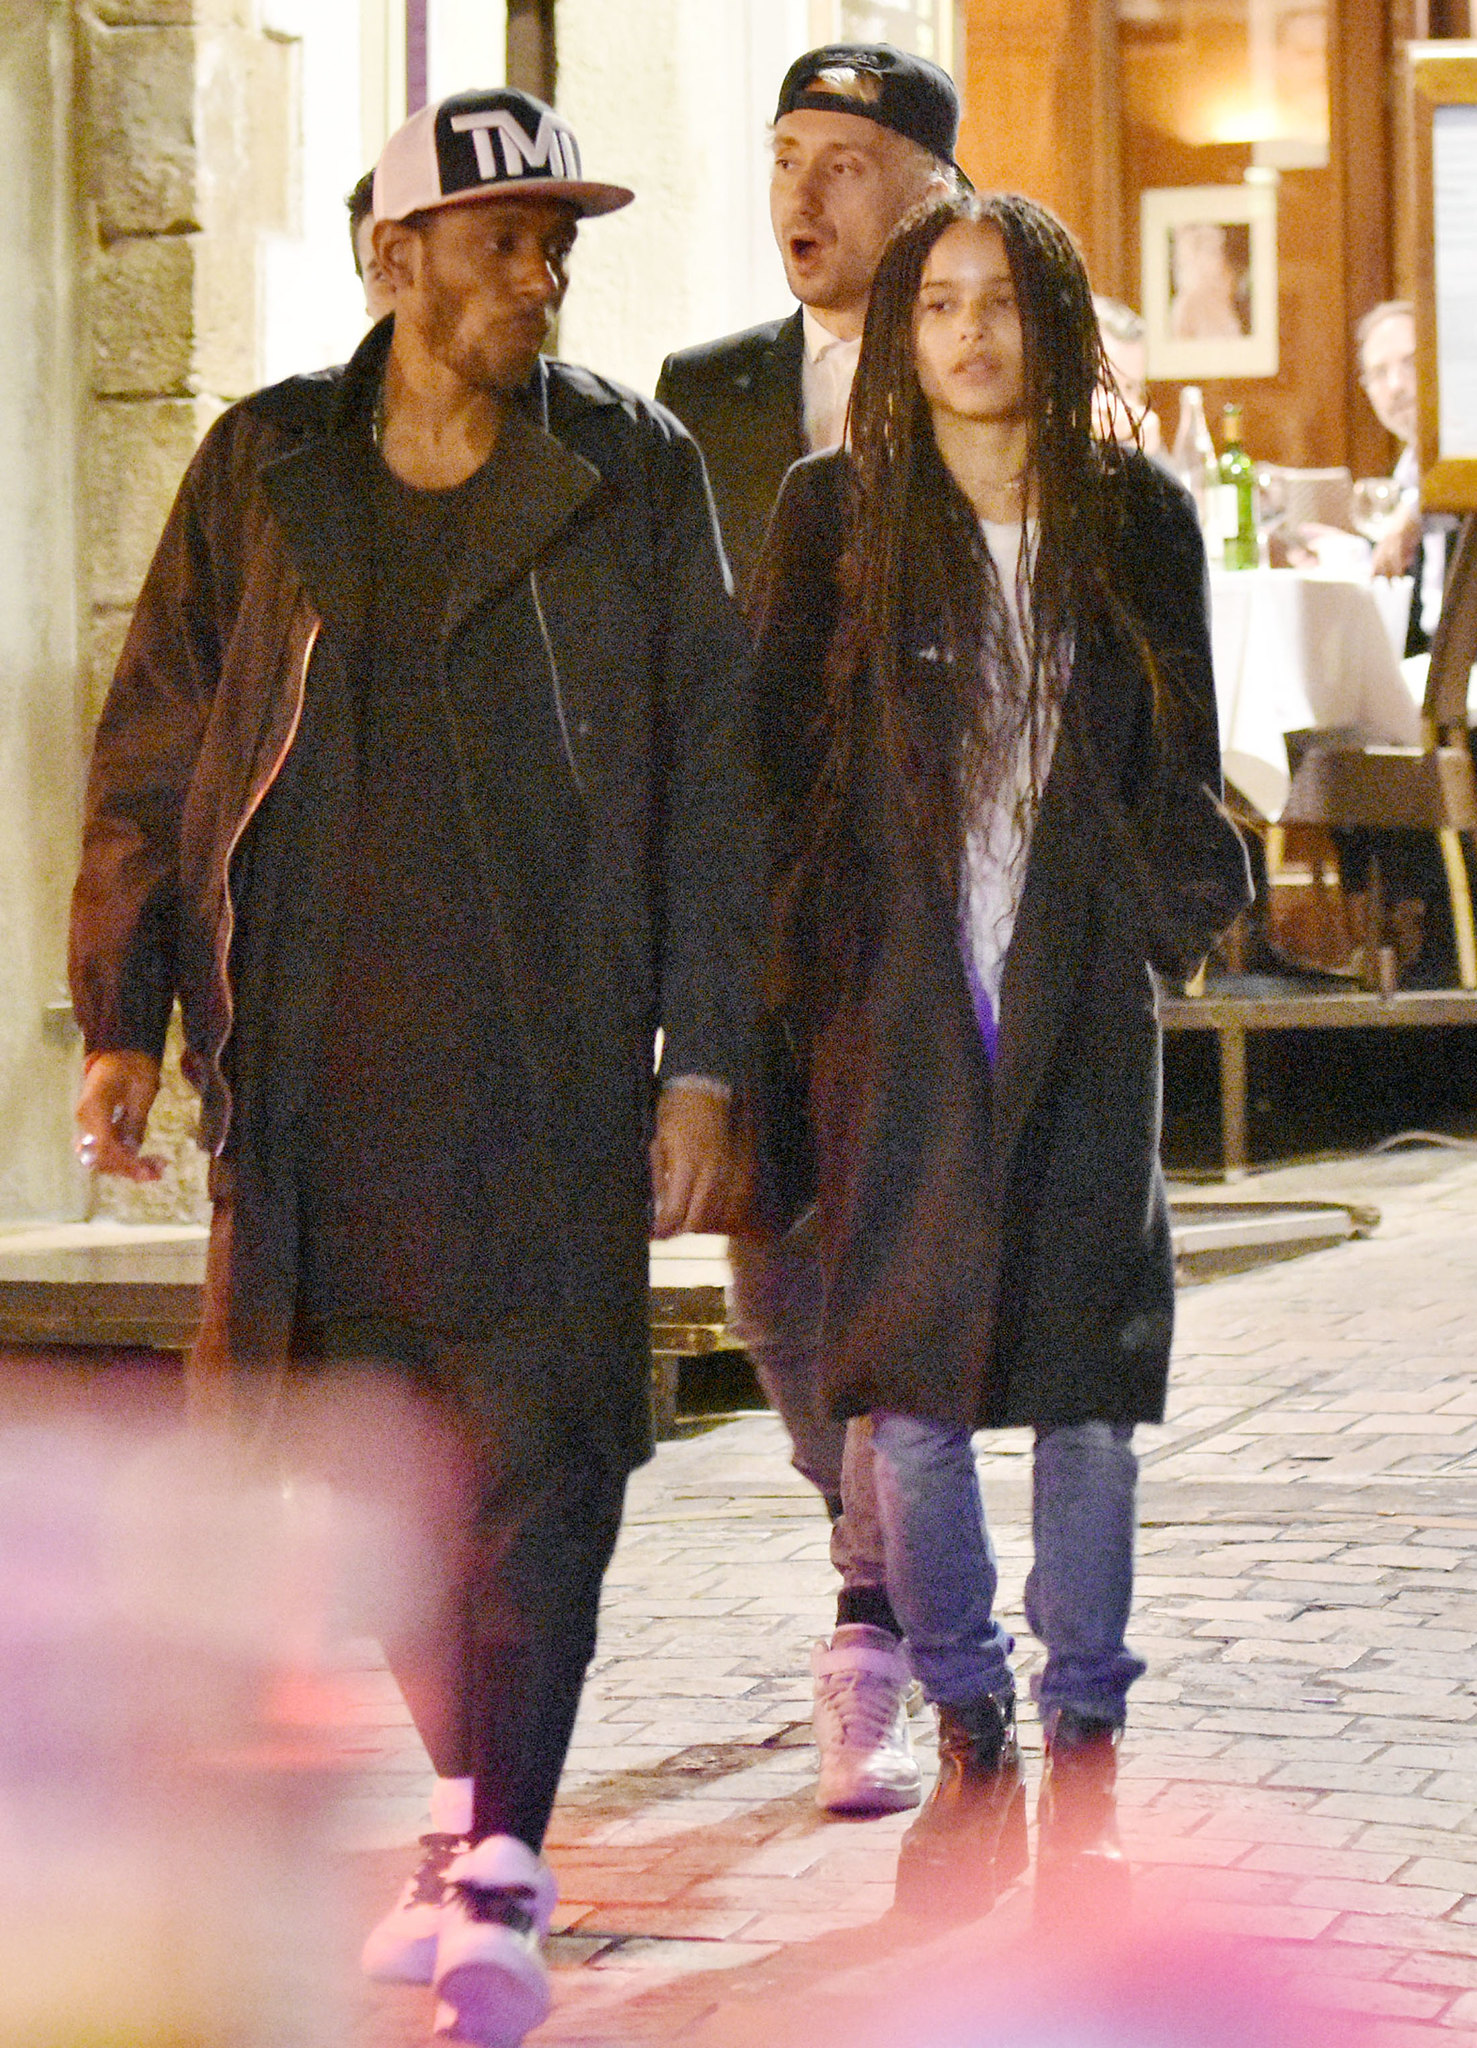 Yasiin Bey (Mos Def) and Zoe Kravitz seen out again in Cannes 5/21/15